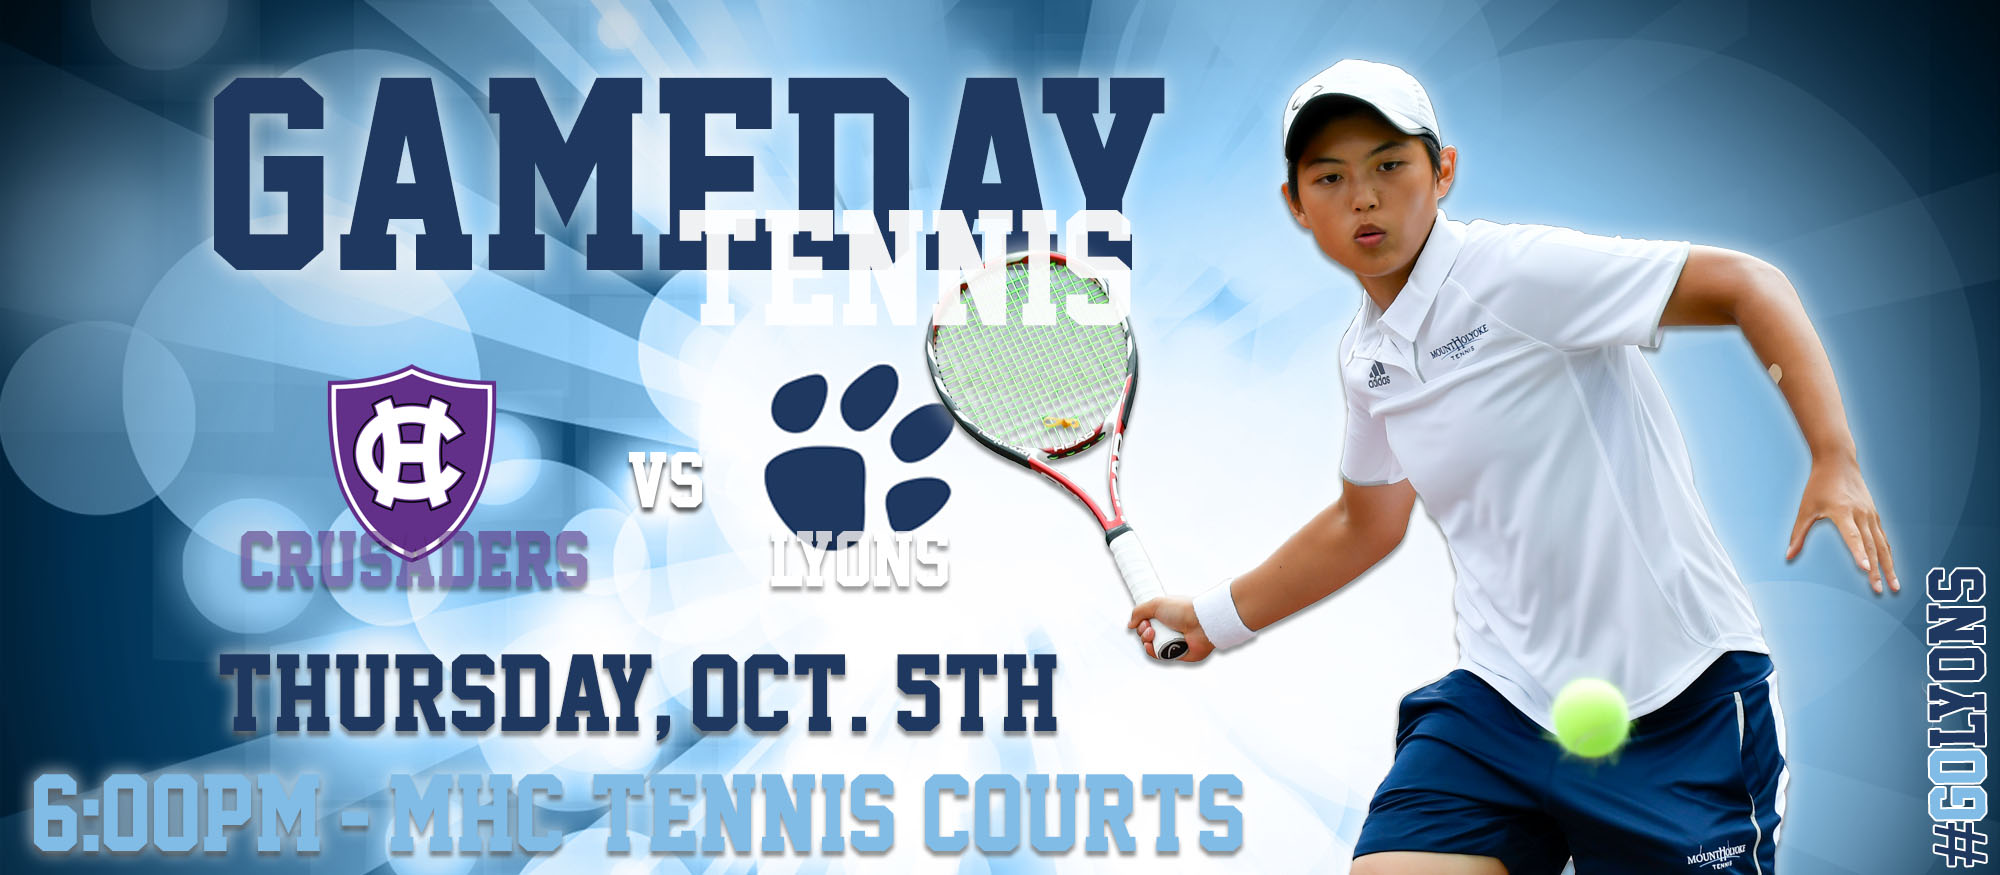 Gameday graphic promoting Thursday, October 5th tennis home match against Holy Cross at 6pm.